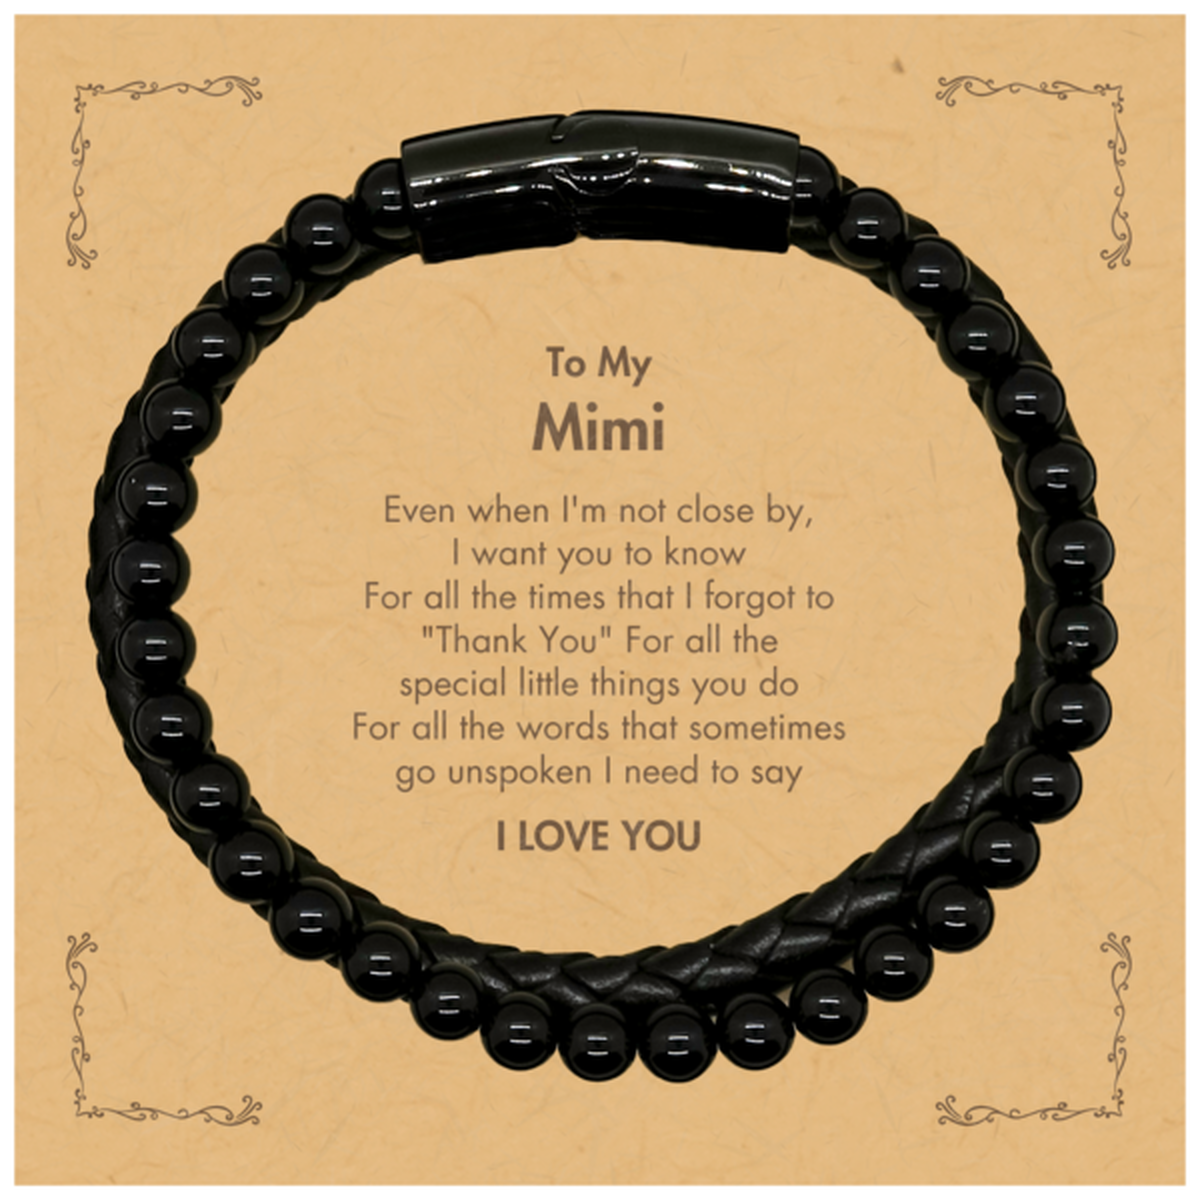 Thank You Gifts for Mimi, Keepsake Stone Leather Bracelets Gifts for Mimi Birthday Mother's day Father's Day Mimi For all the words That sometimes go unspoken I need to say I LOVE YOU